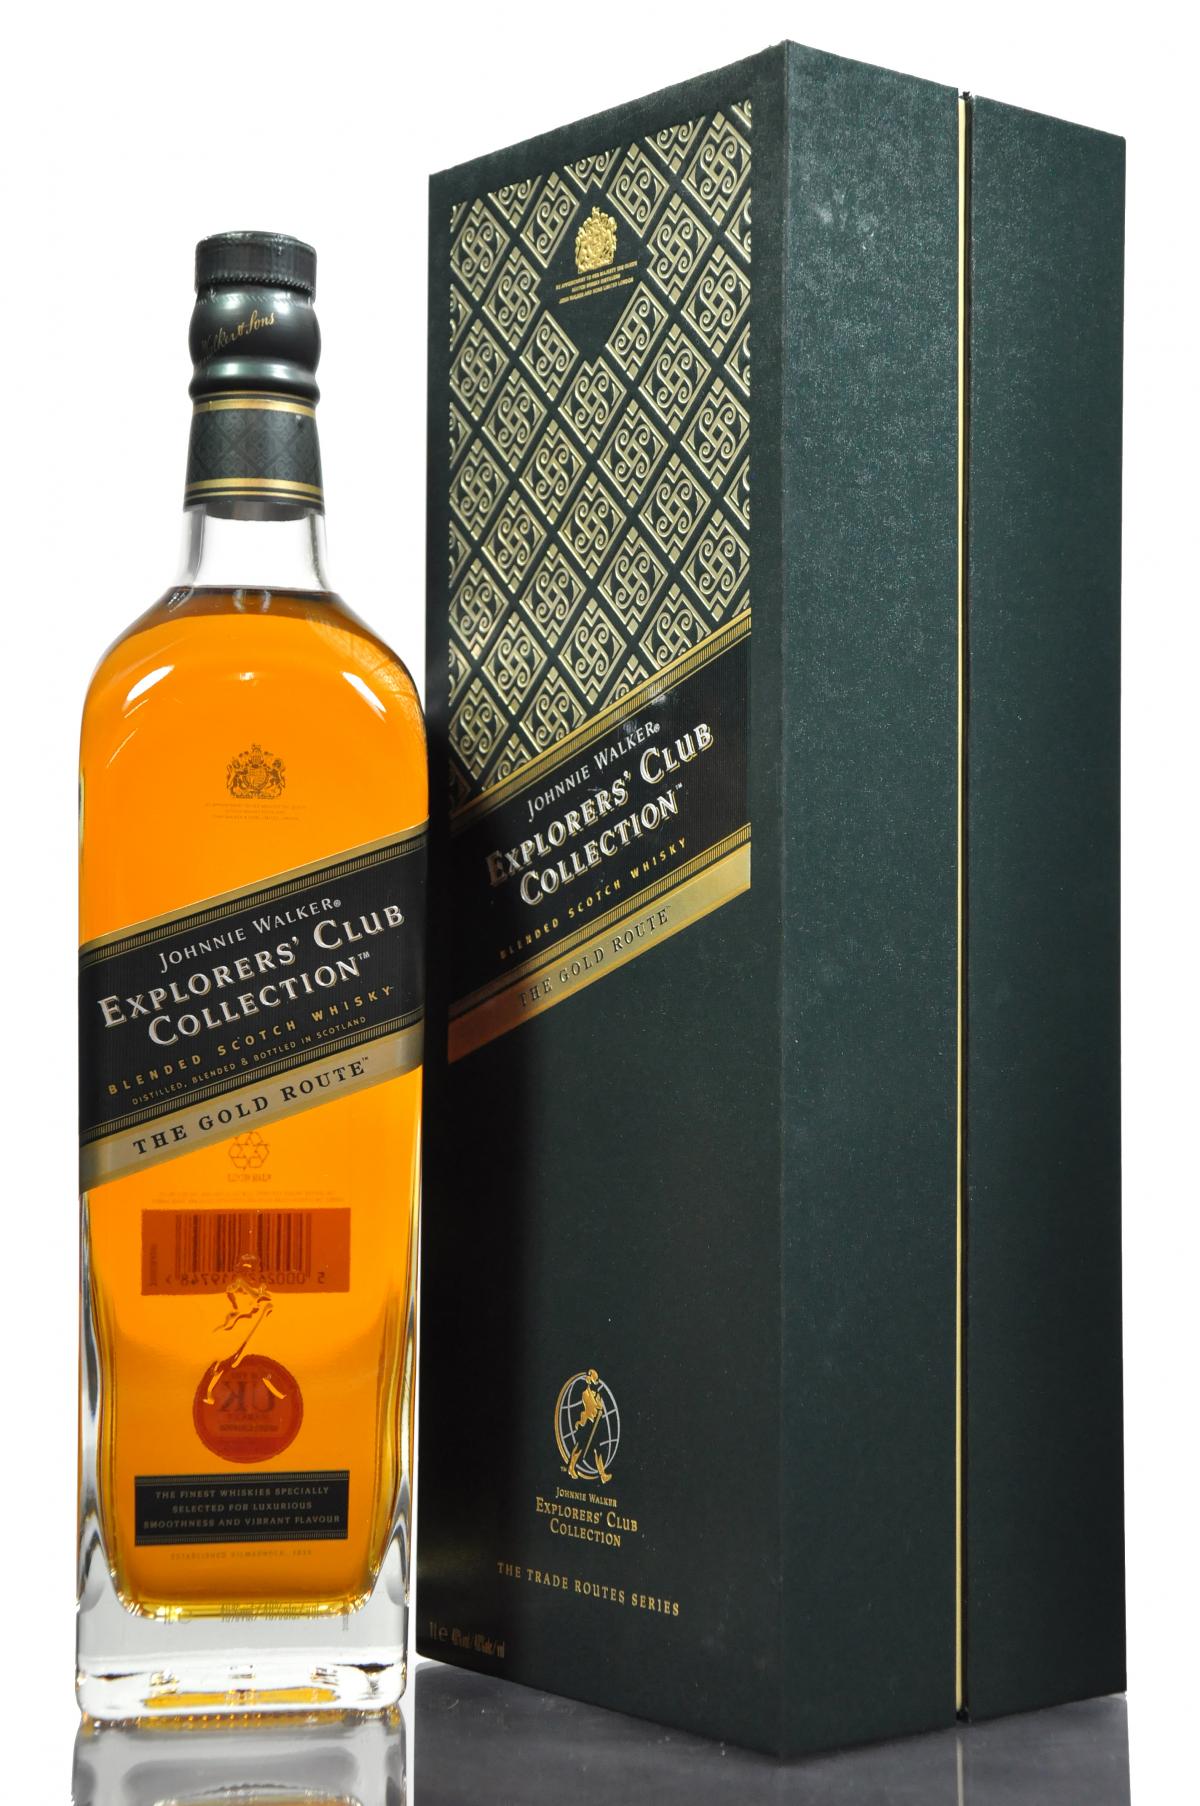 Johnnie Walker Explorers Club Collection - The Gold Route - 1 Litre